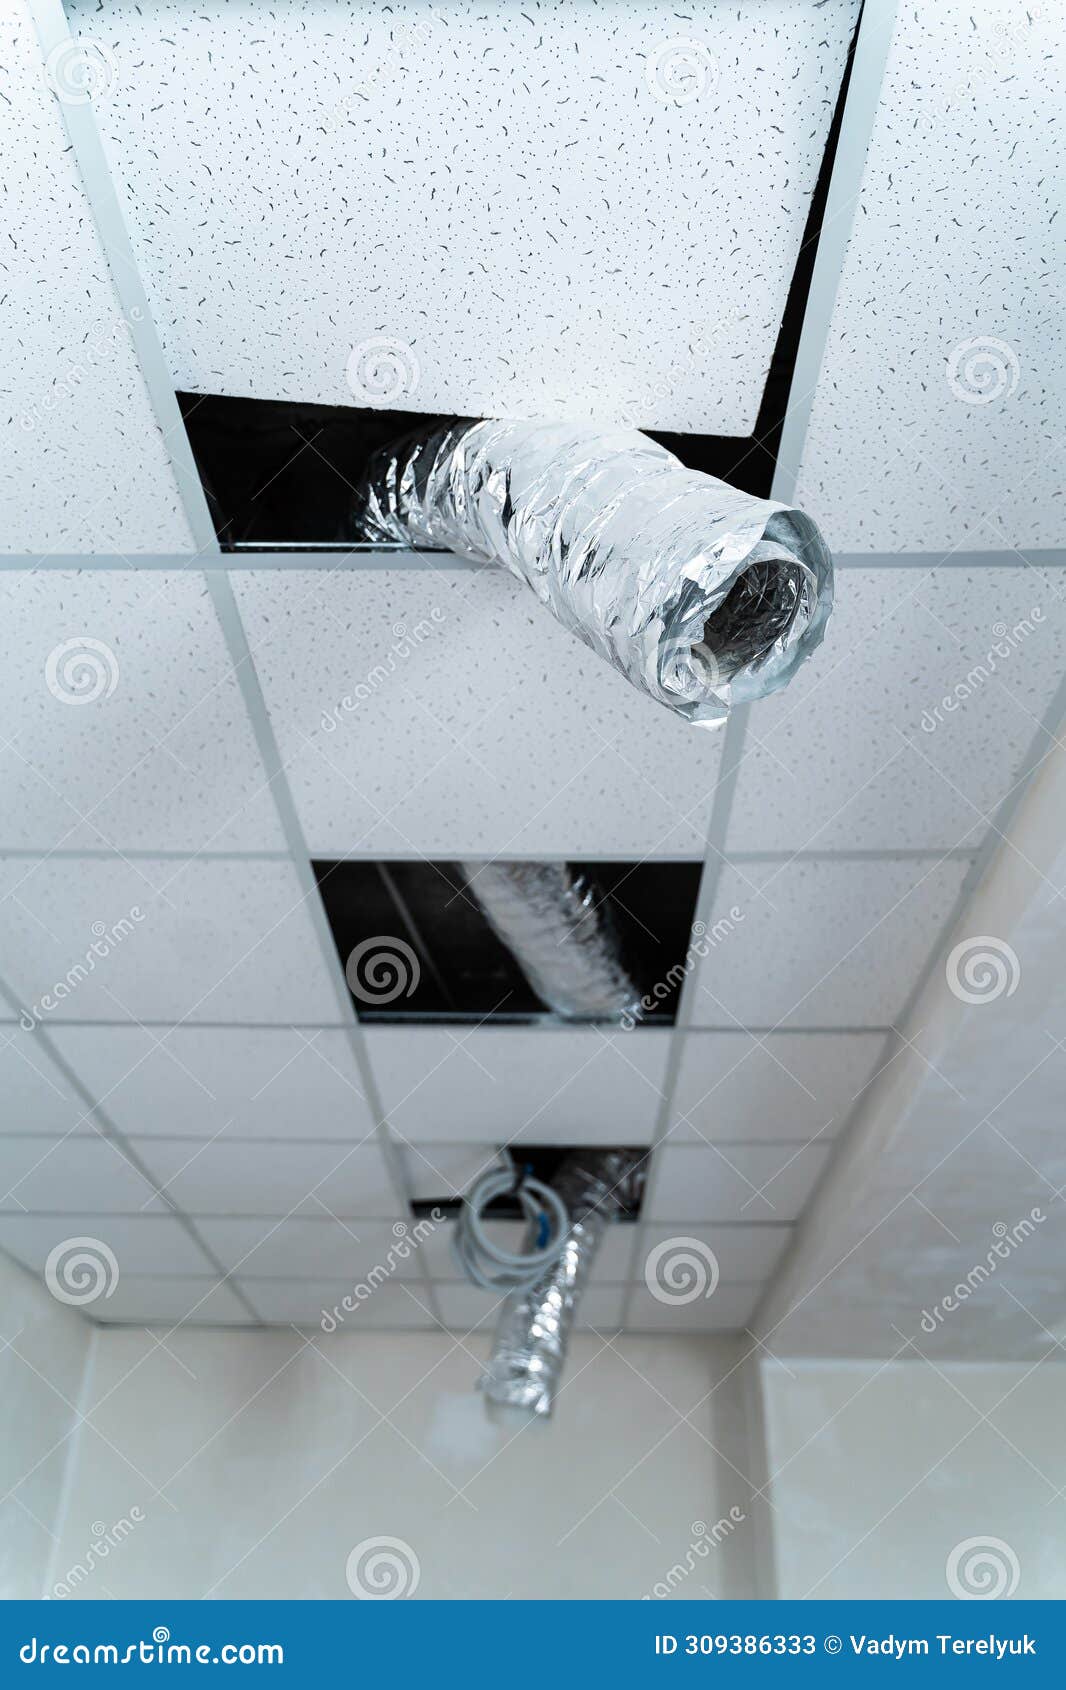 empty industrial facility with grey wall. internet cable hangs from the ceiling. air conditioning tube. closeup